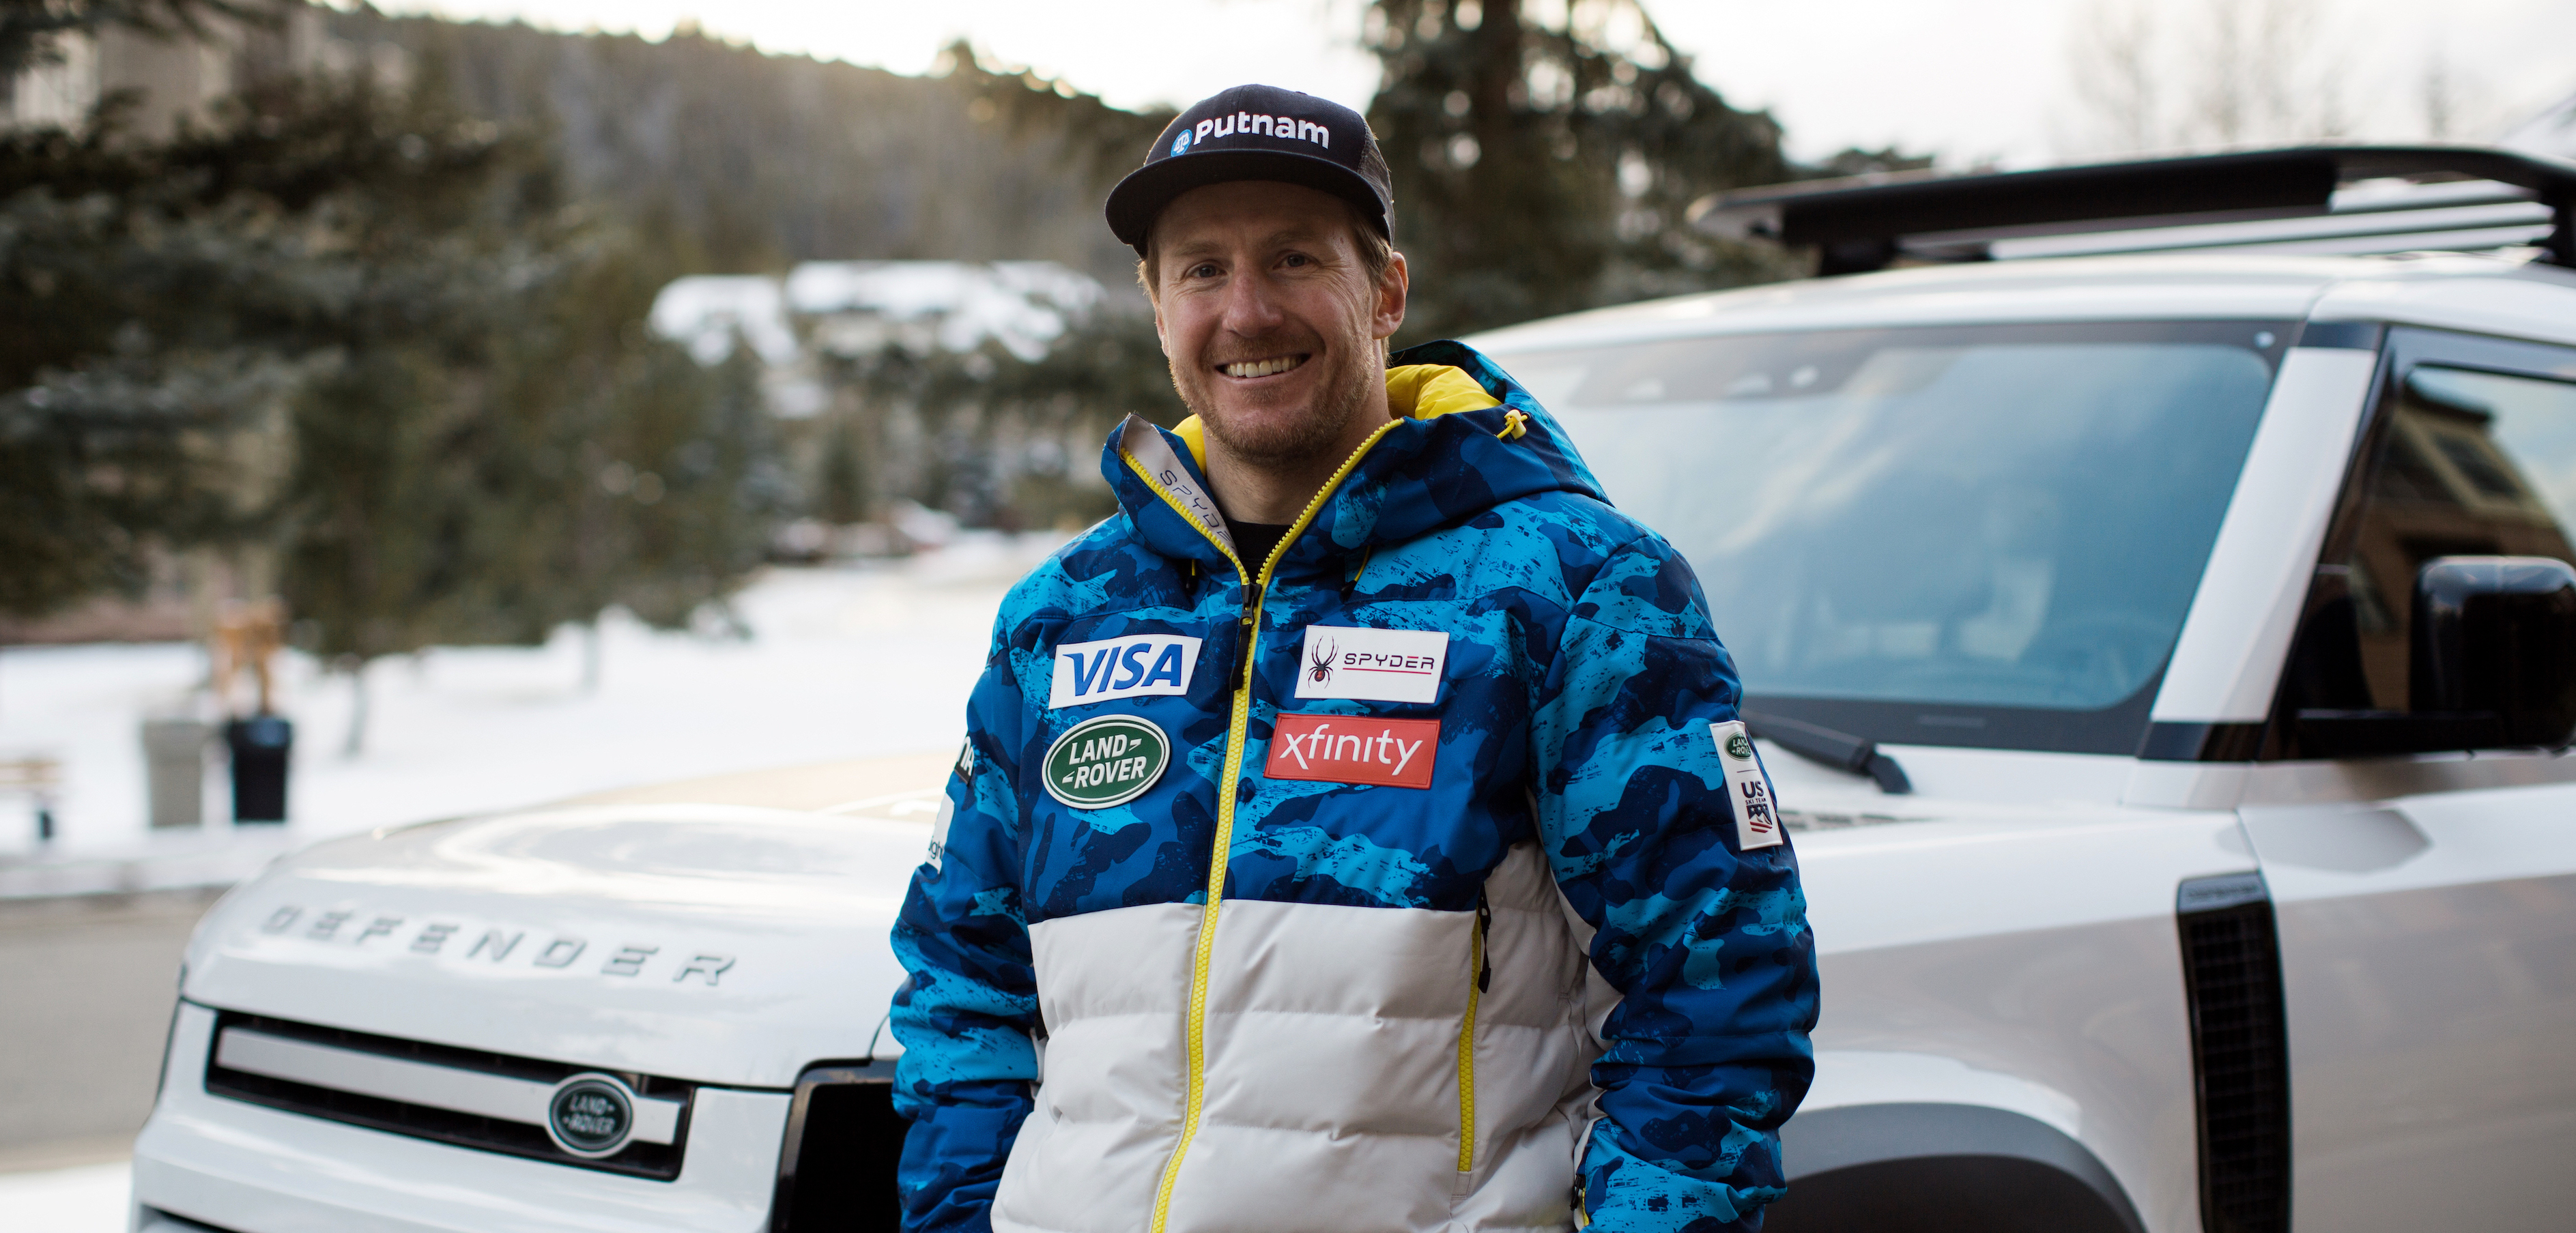 Ted Ligety Retirement